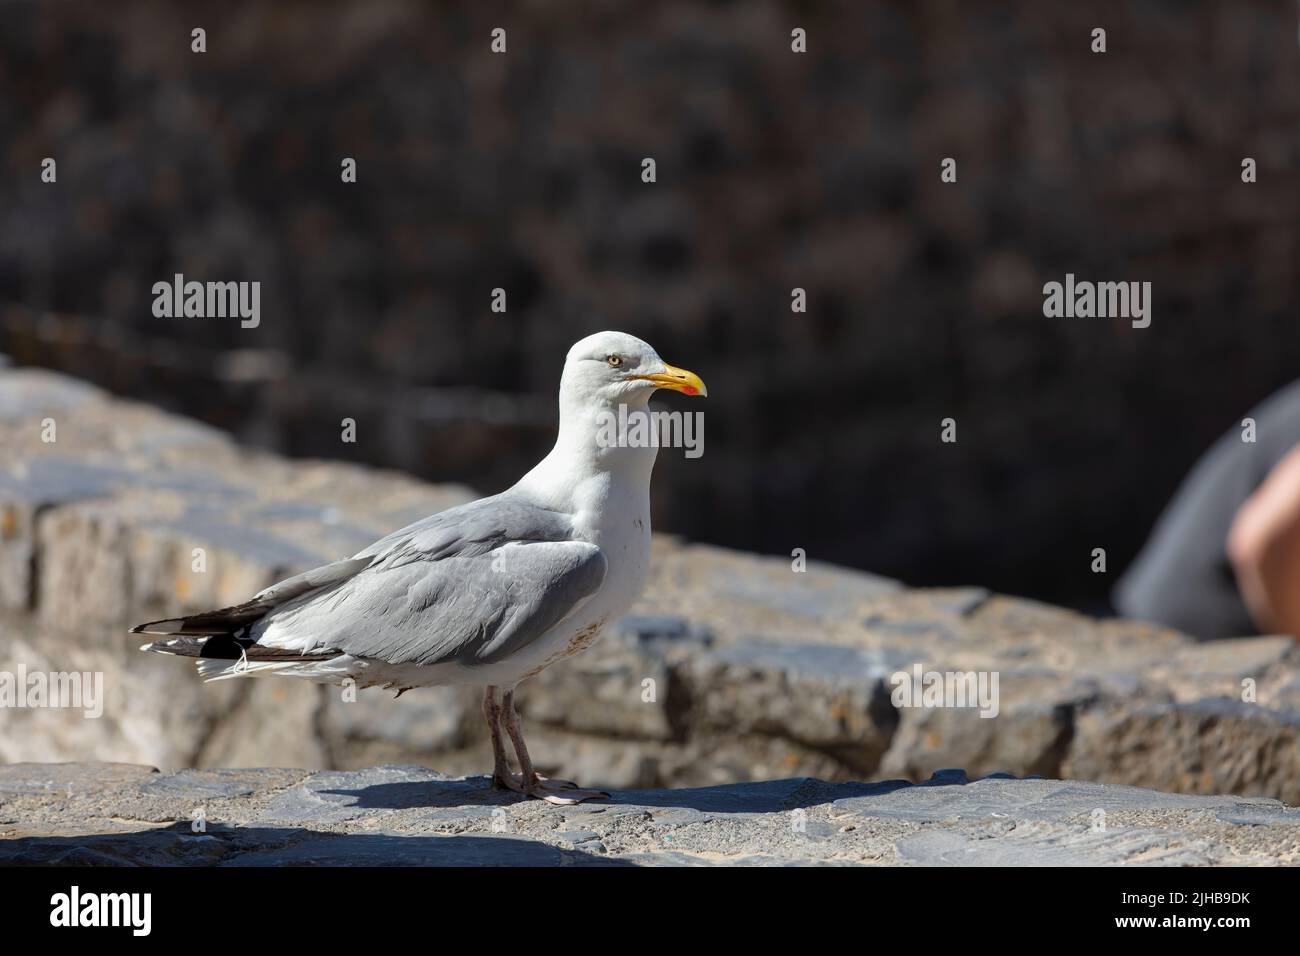 Herring Gull standing on a road Stock Photo